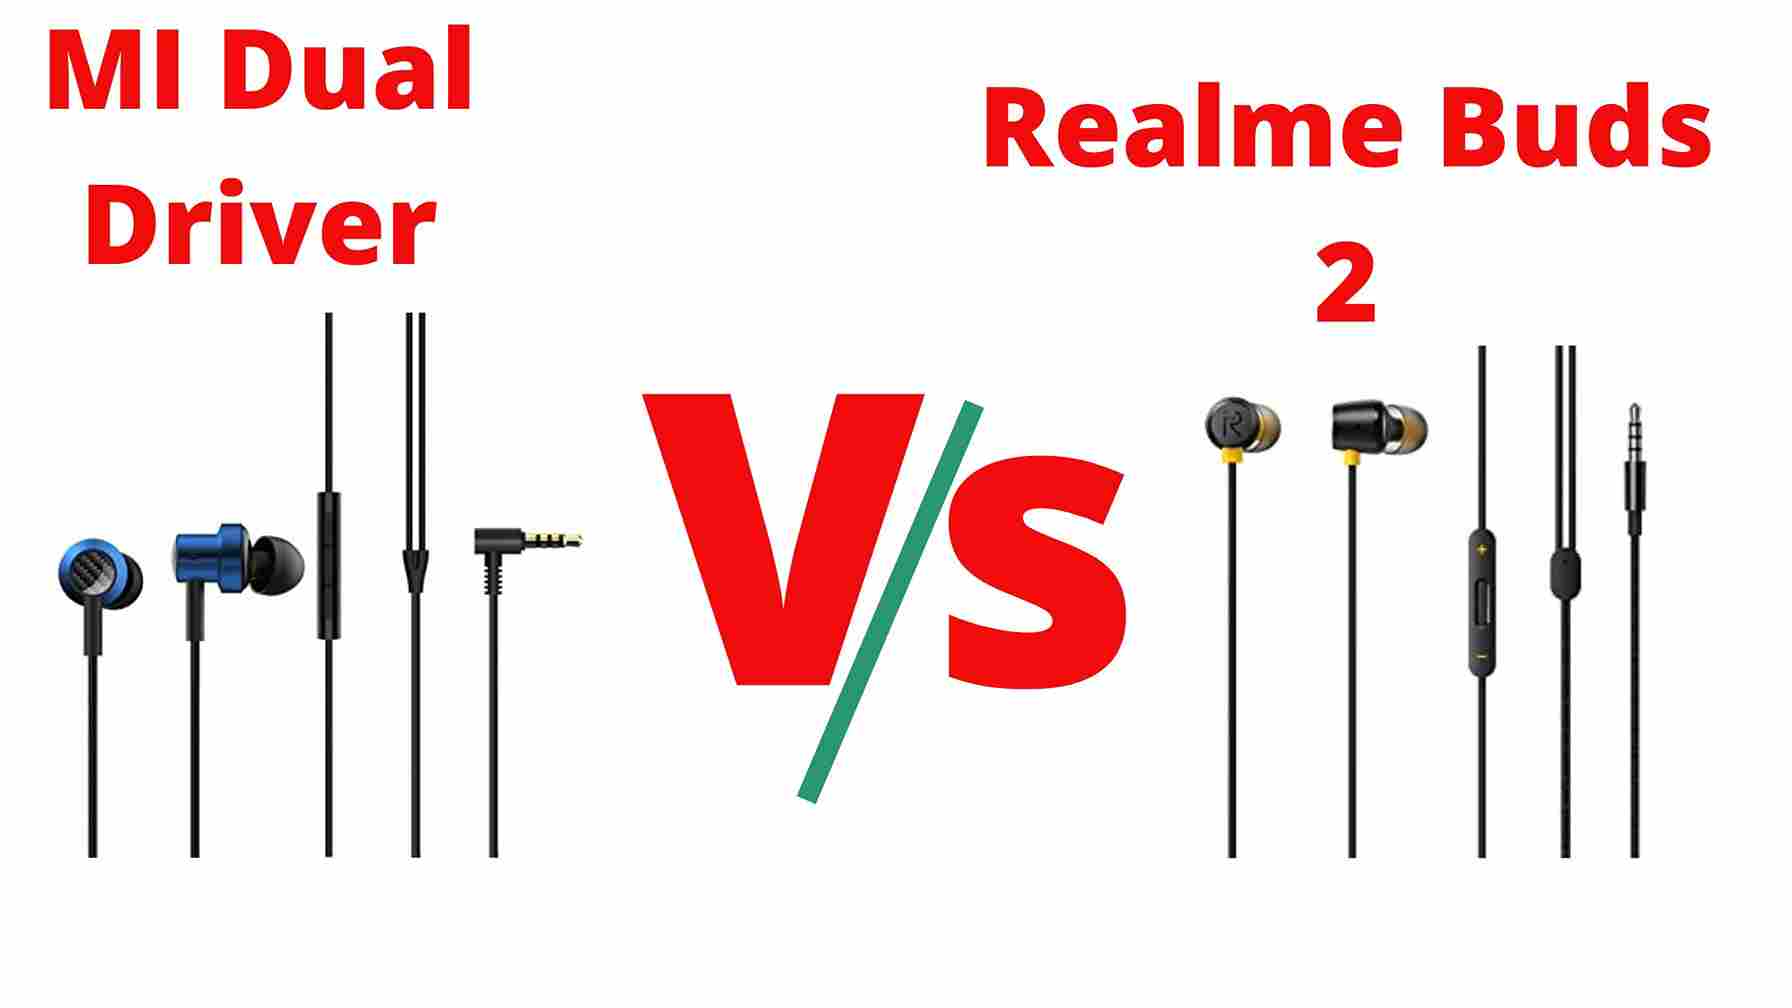 Realme Buds 2 vs Mi Dual Driver Which is better?